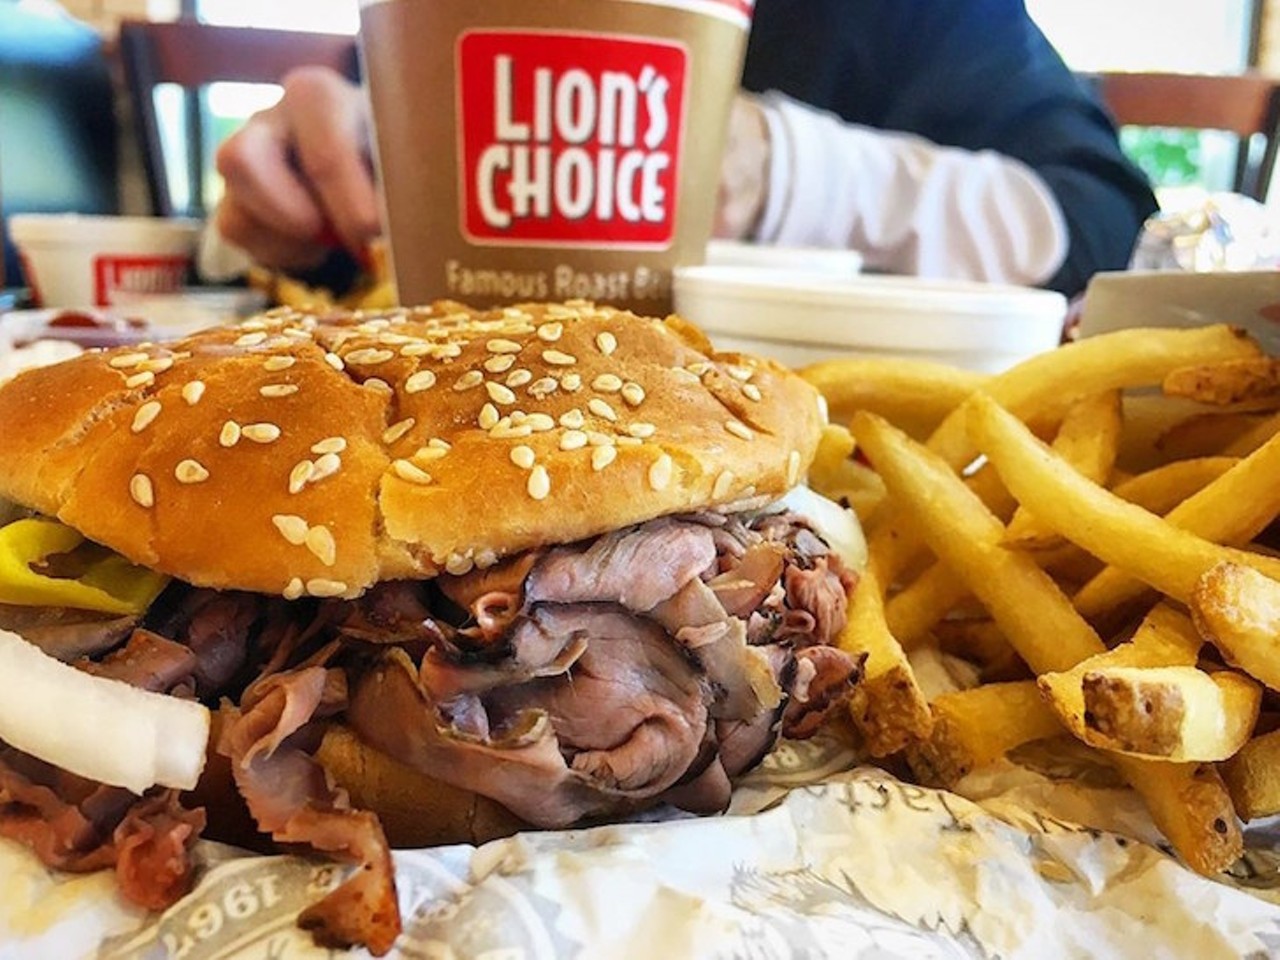 Lion&#146;s Choice 
Lion&#146;s Choice&#146;s menu of top-round roast beef, slow-roasted daily and thin-sliced for roast beef sandwiches could is enough to satisfy any hungry predator, or say a Tampa native who&#146;s sick of Arby&#146;s. For now, this carnivore&#146;s delight can only be found in and around St. Louis. If everything the light touched was your kingdom, wouldn&#146;t you think about setting up shop in the Sunshine State? Take a hint Lion&#146;s Choice.
Photo via Lion&#146;s Choice/Facebook